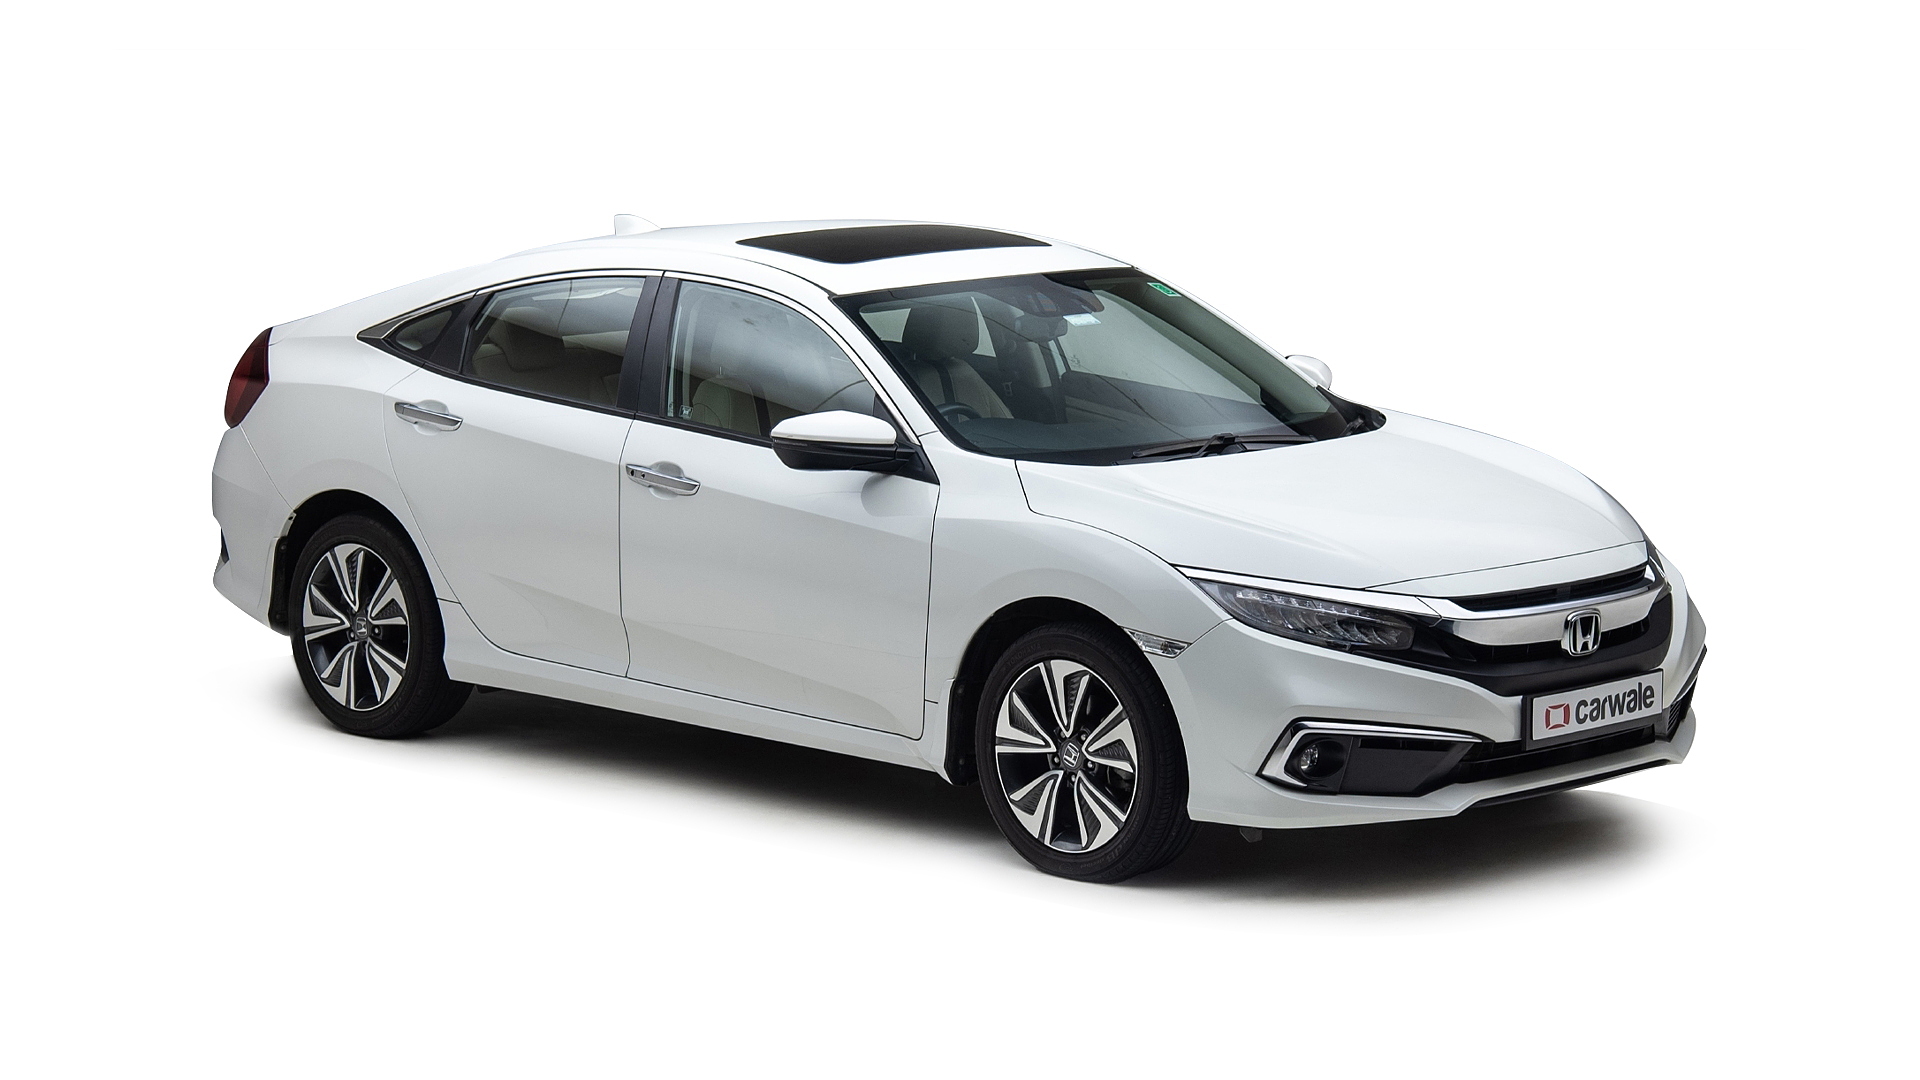 Honda Civic Zx Cvt Petrol Price In India Features Specs And Reviews Carwale